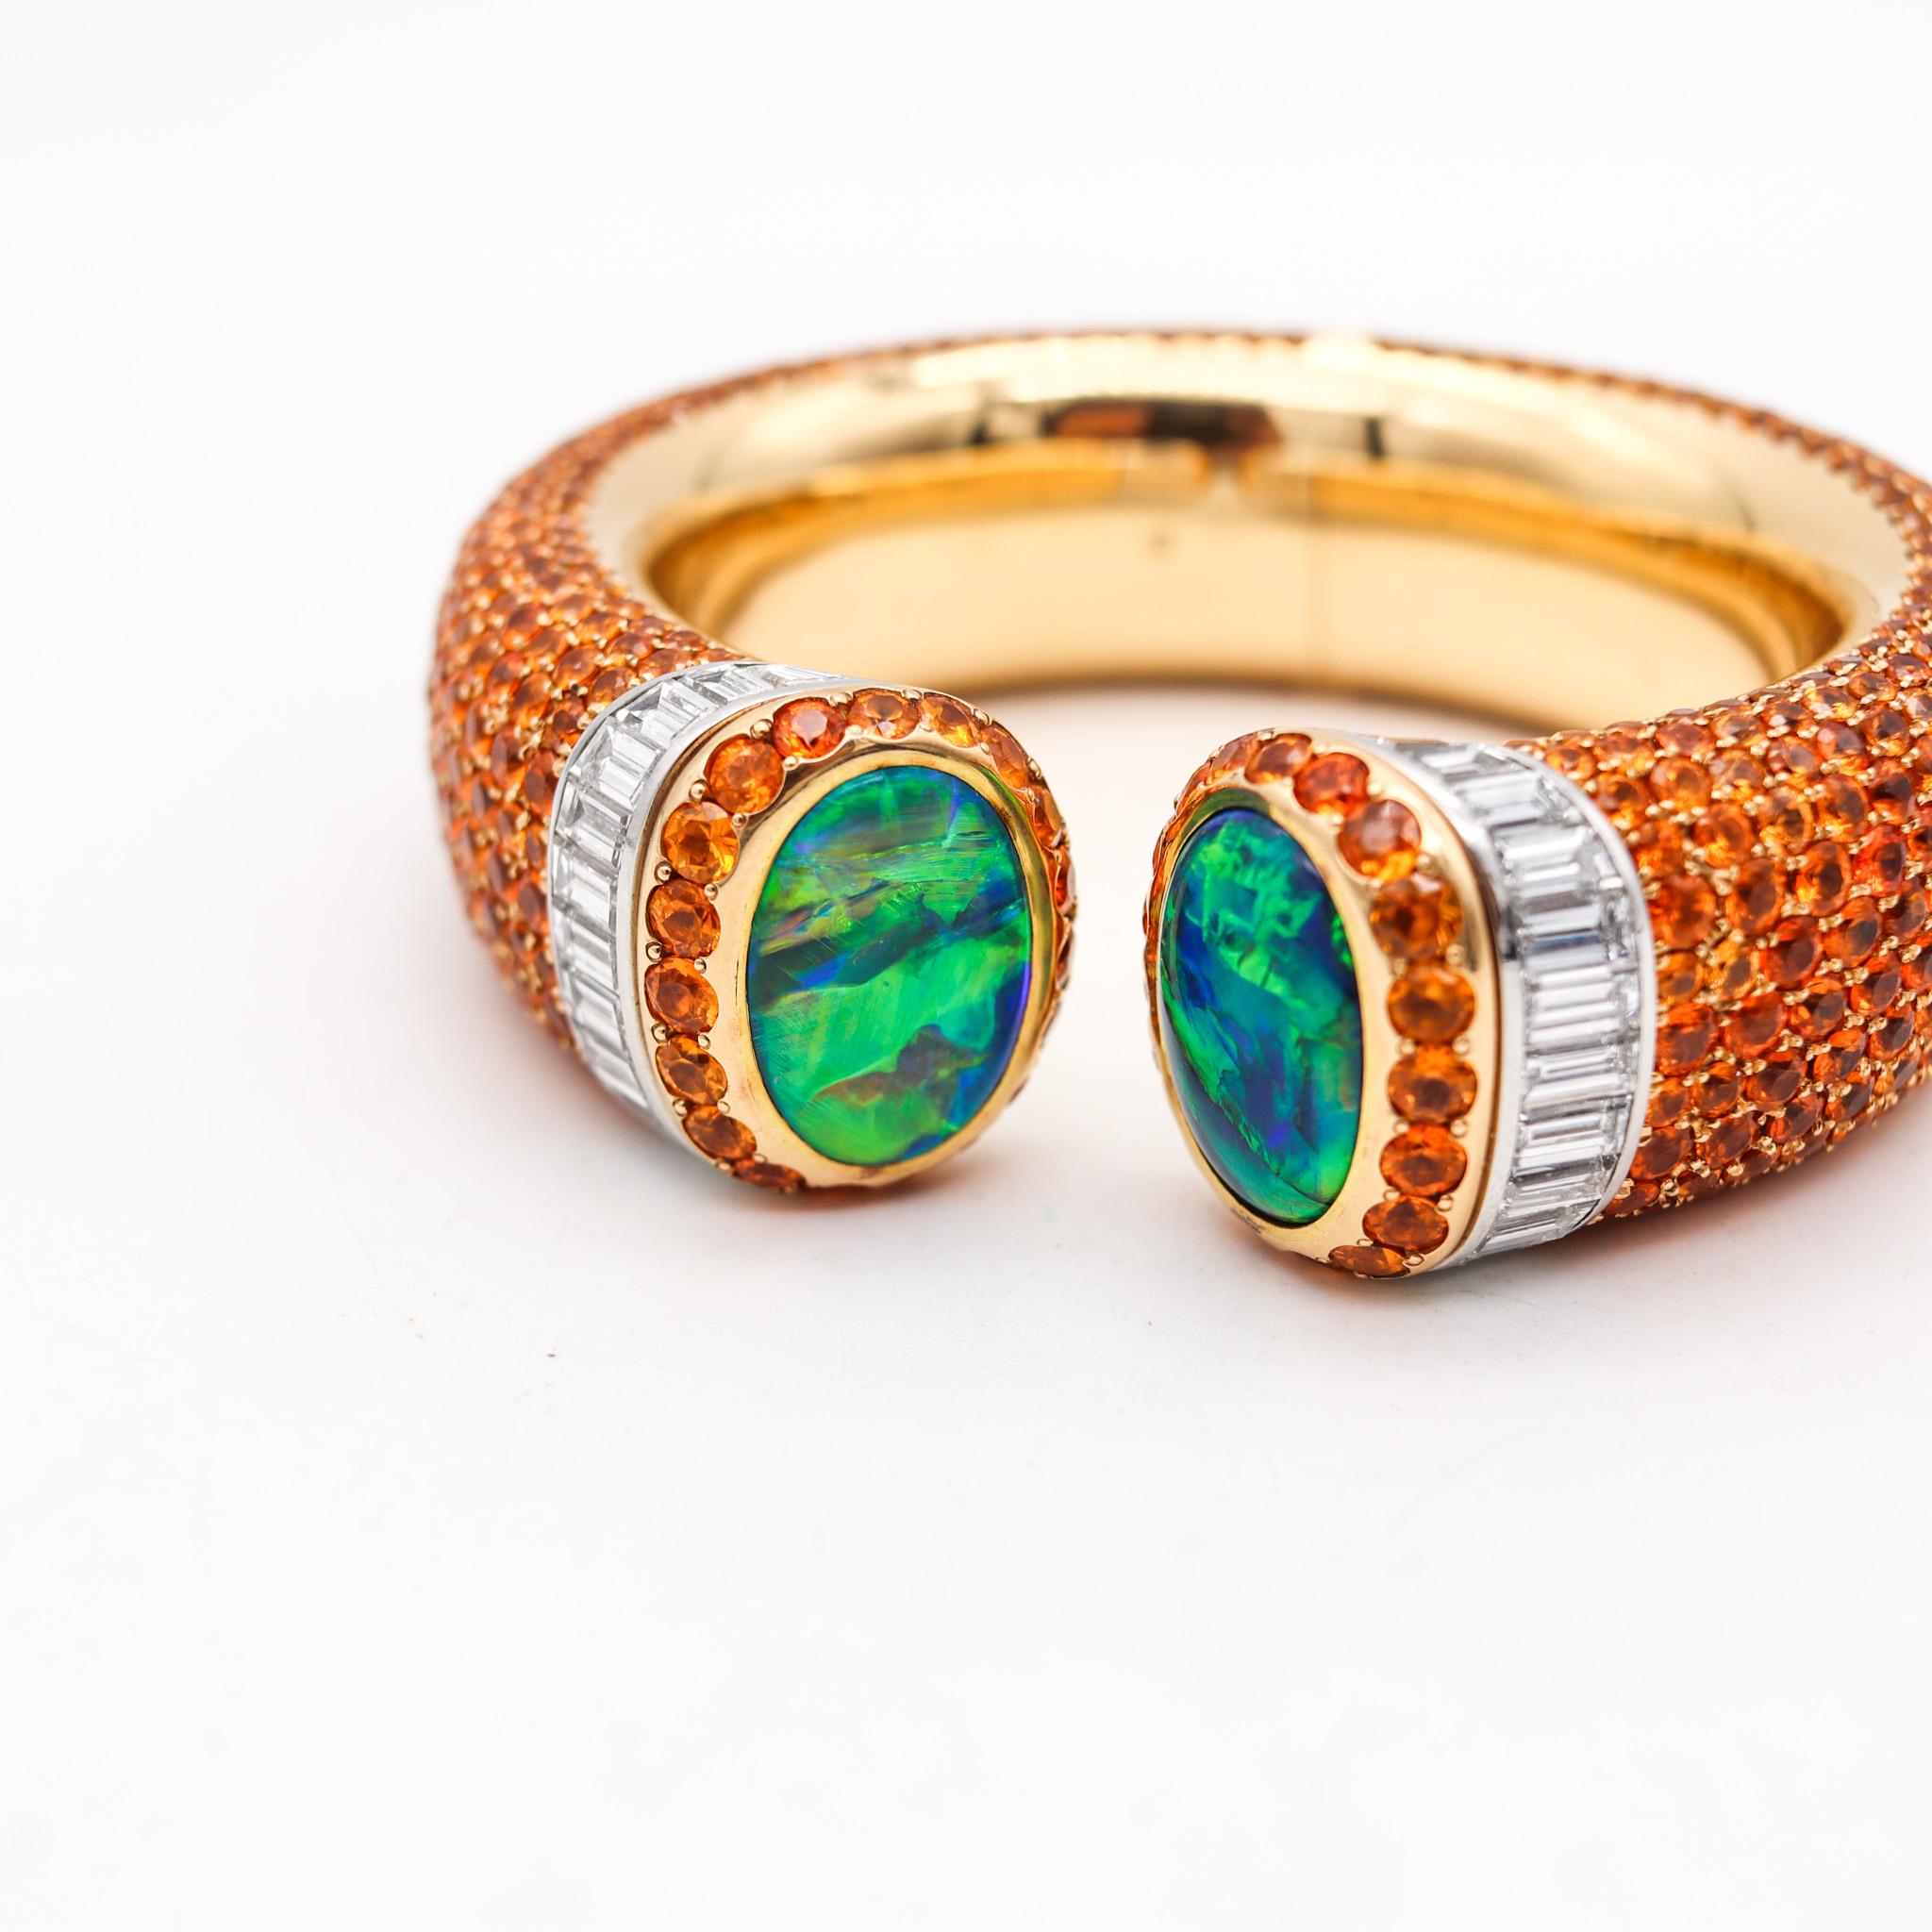 Hemmerle Mandarin Garnets Cuff Bracelet In 18Kt Gold Platinum Diamonds And Opals In Excellent Condition For Sale In Miami, FL